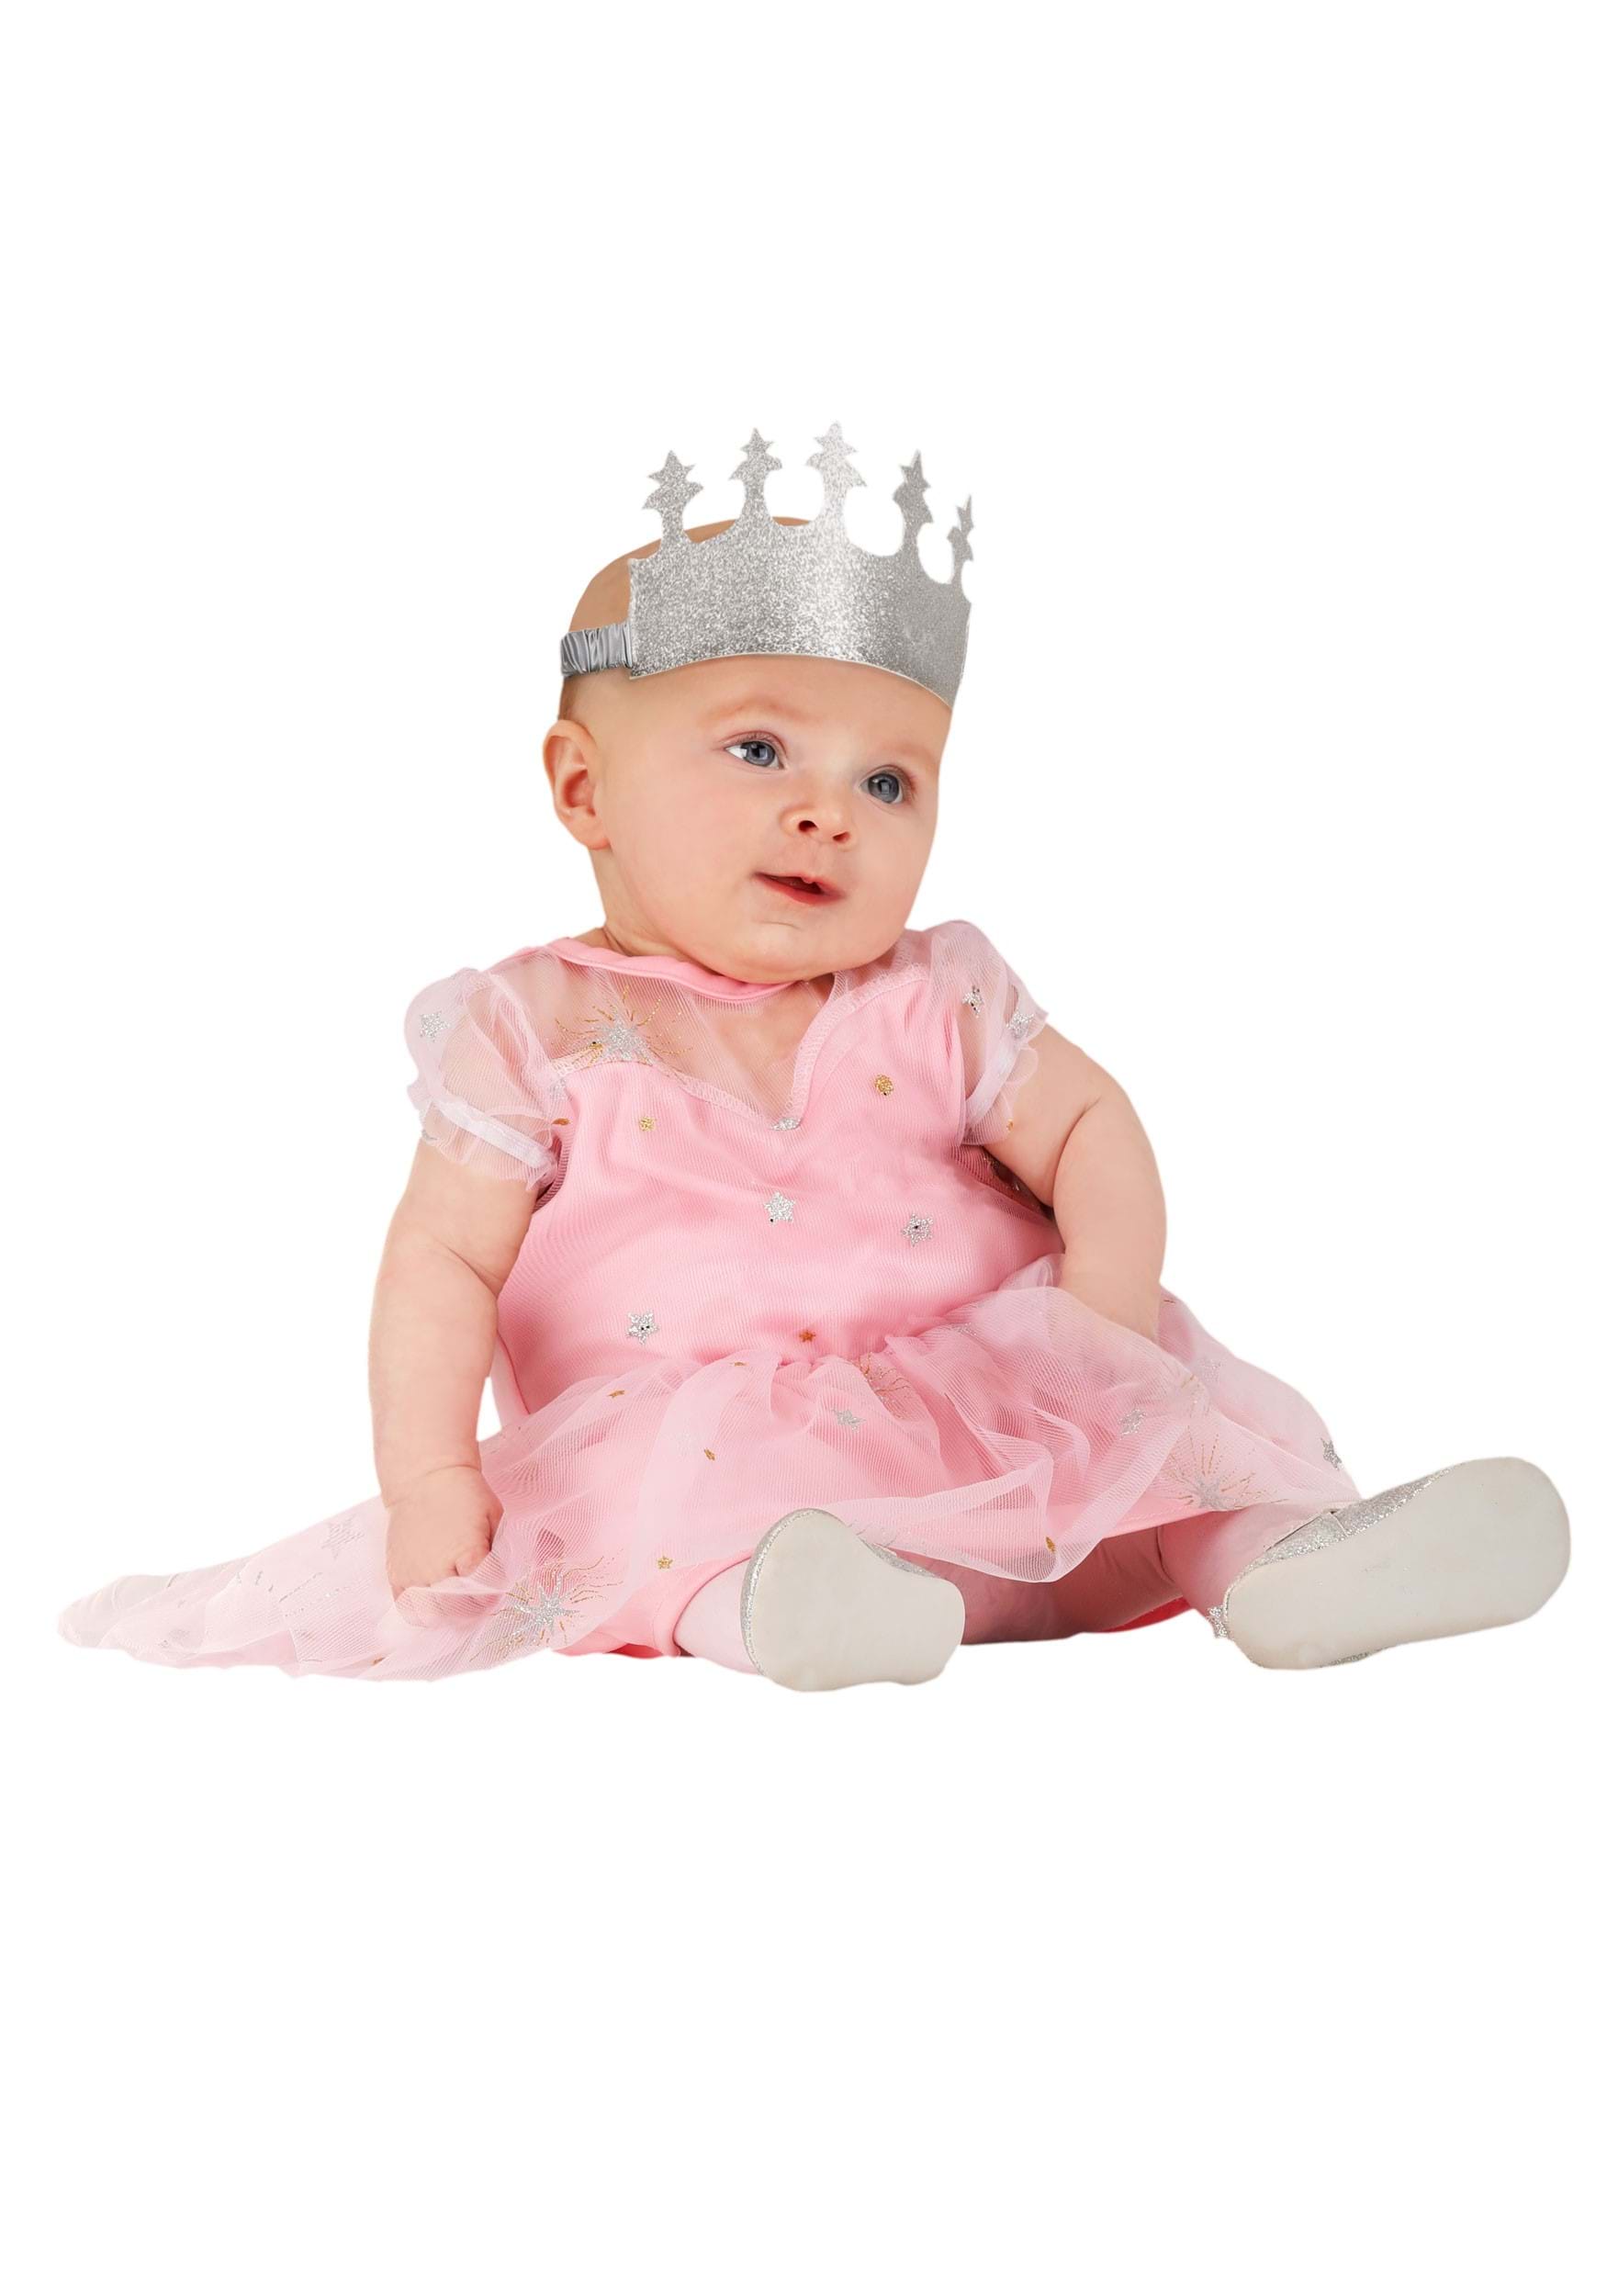 Photos - Fancy Dress Wizard Jerry Leigh  of Oz Infant Glinda the Good Costume | Baby Costumes Pi 